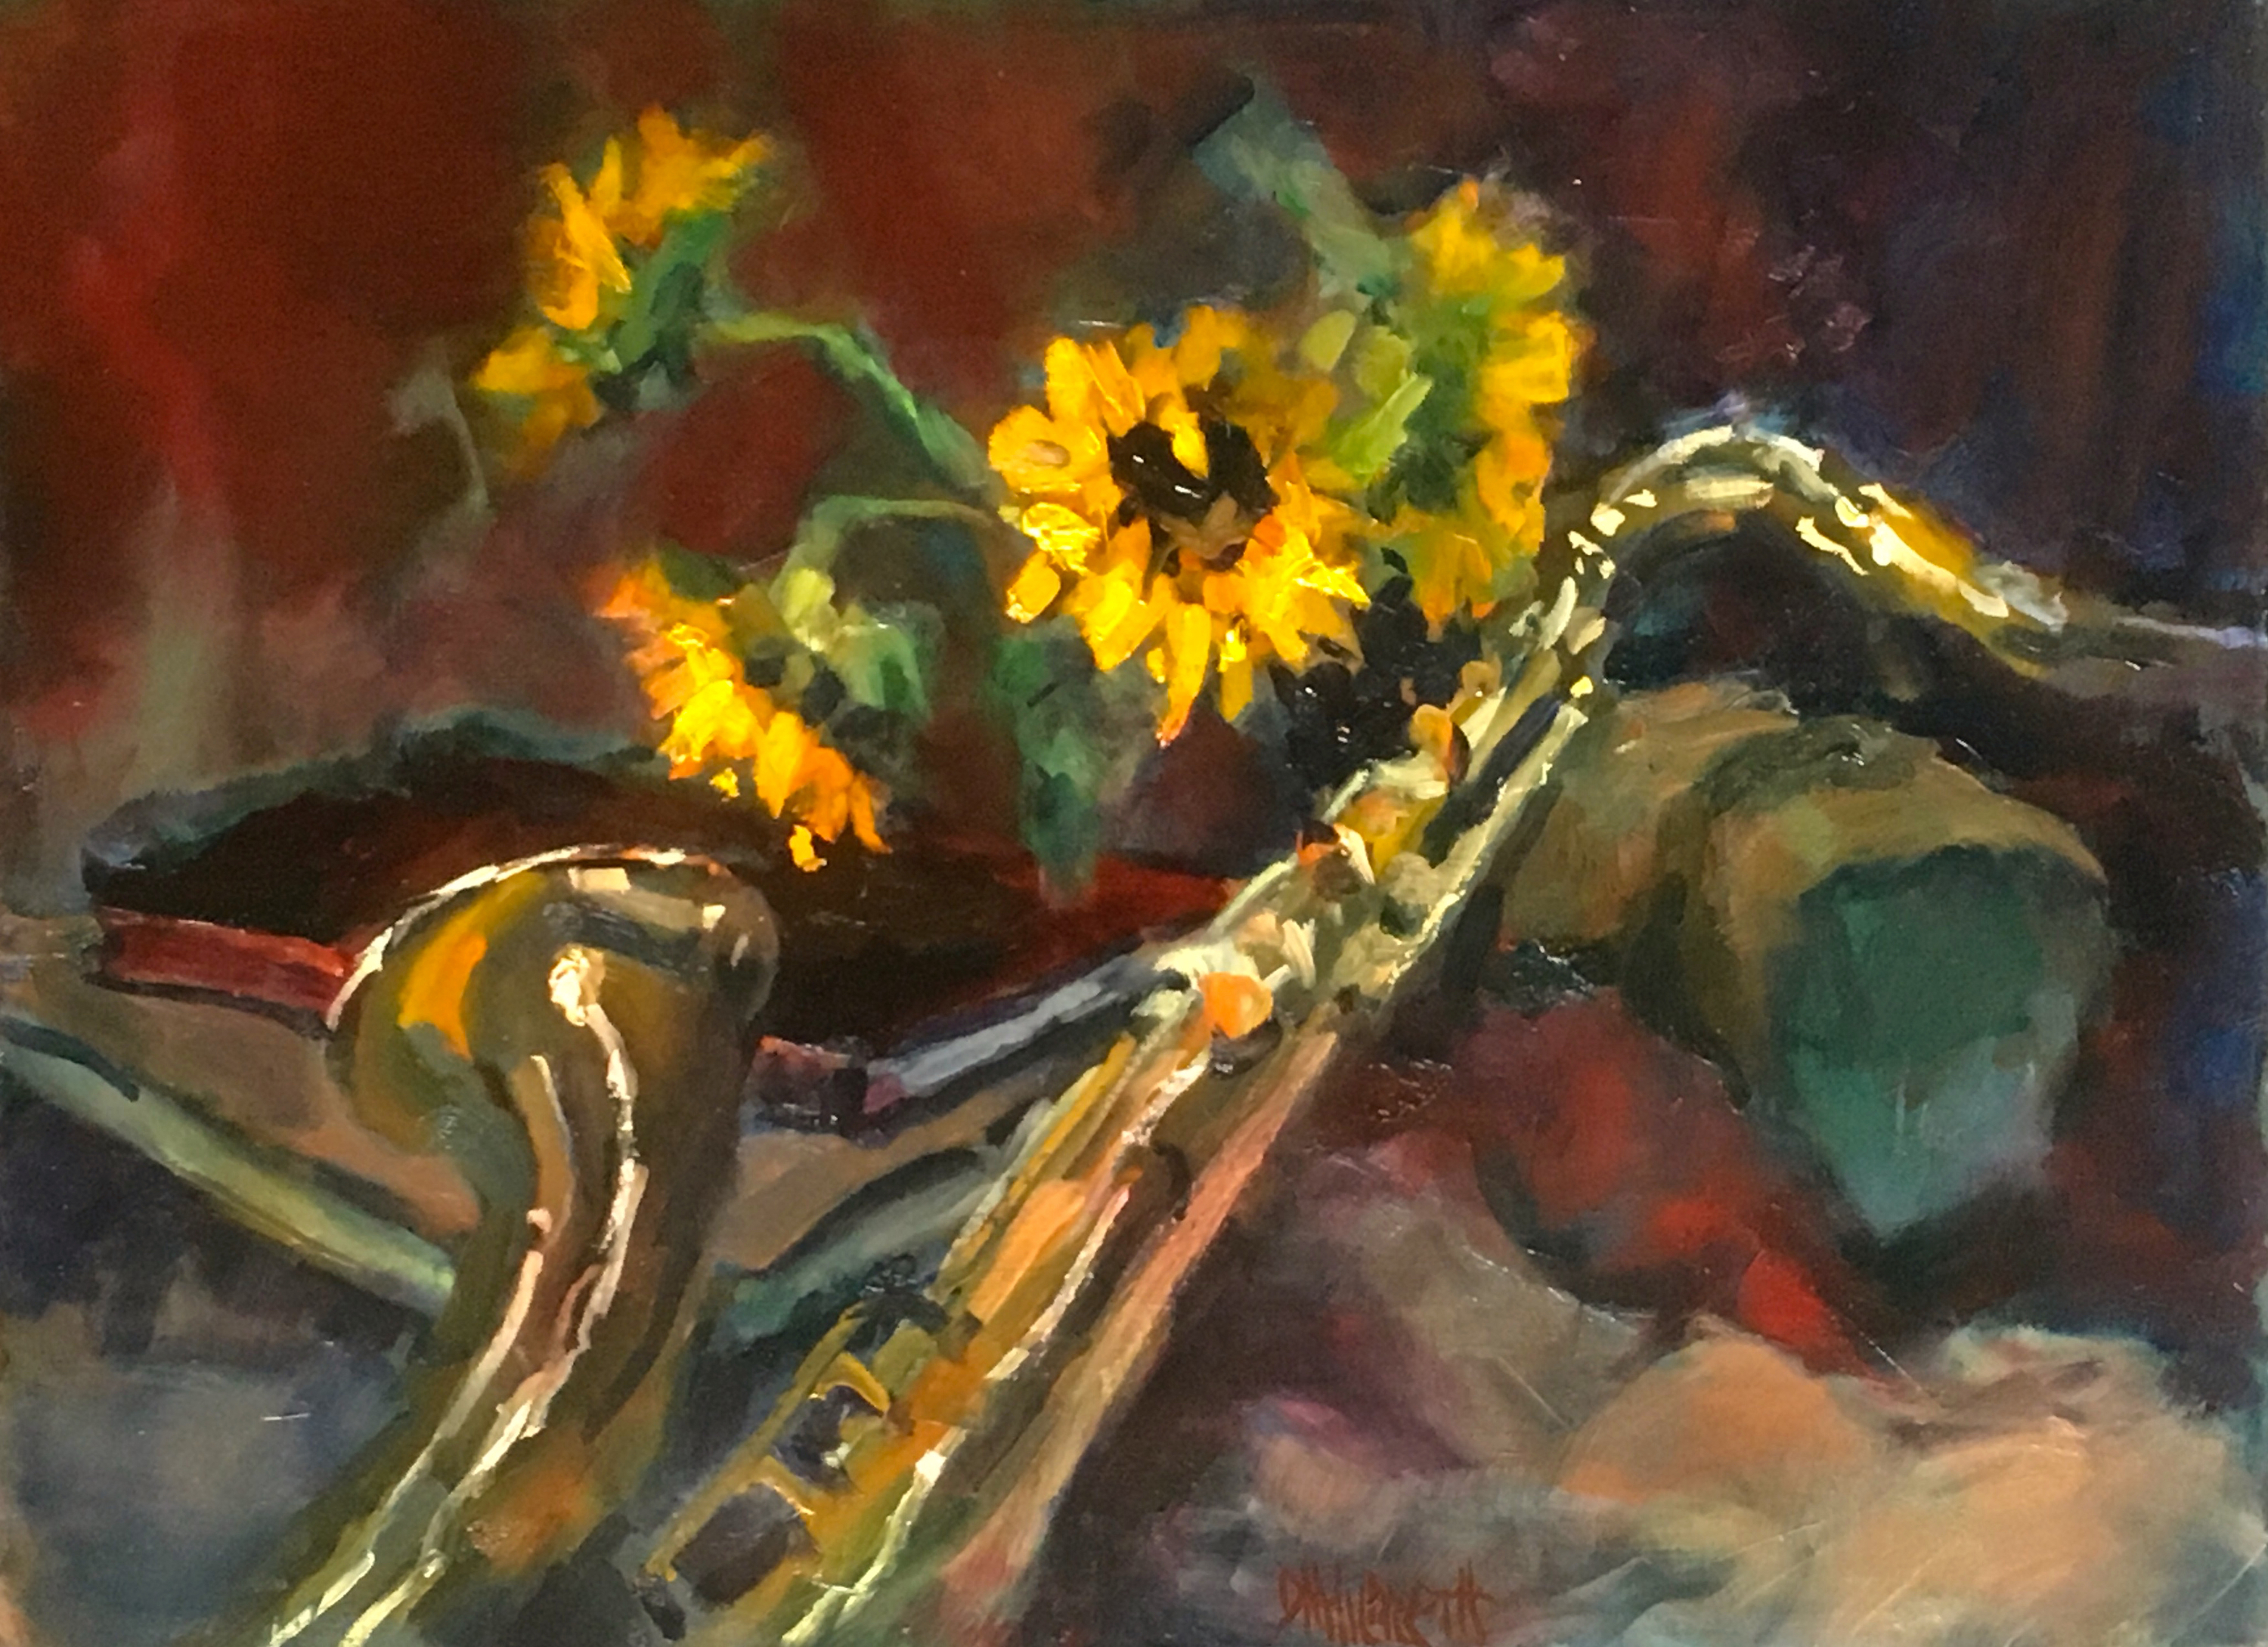 Sunflowers sax 18 24 o c in4dce